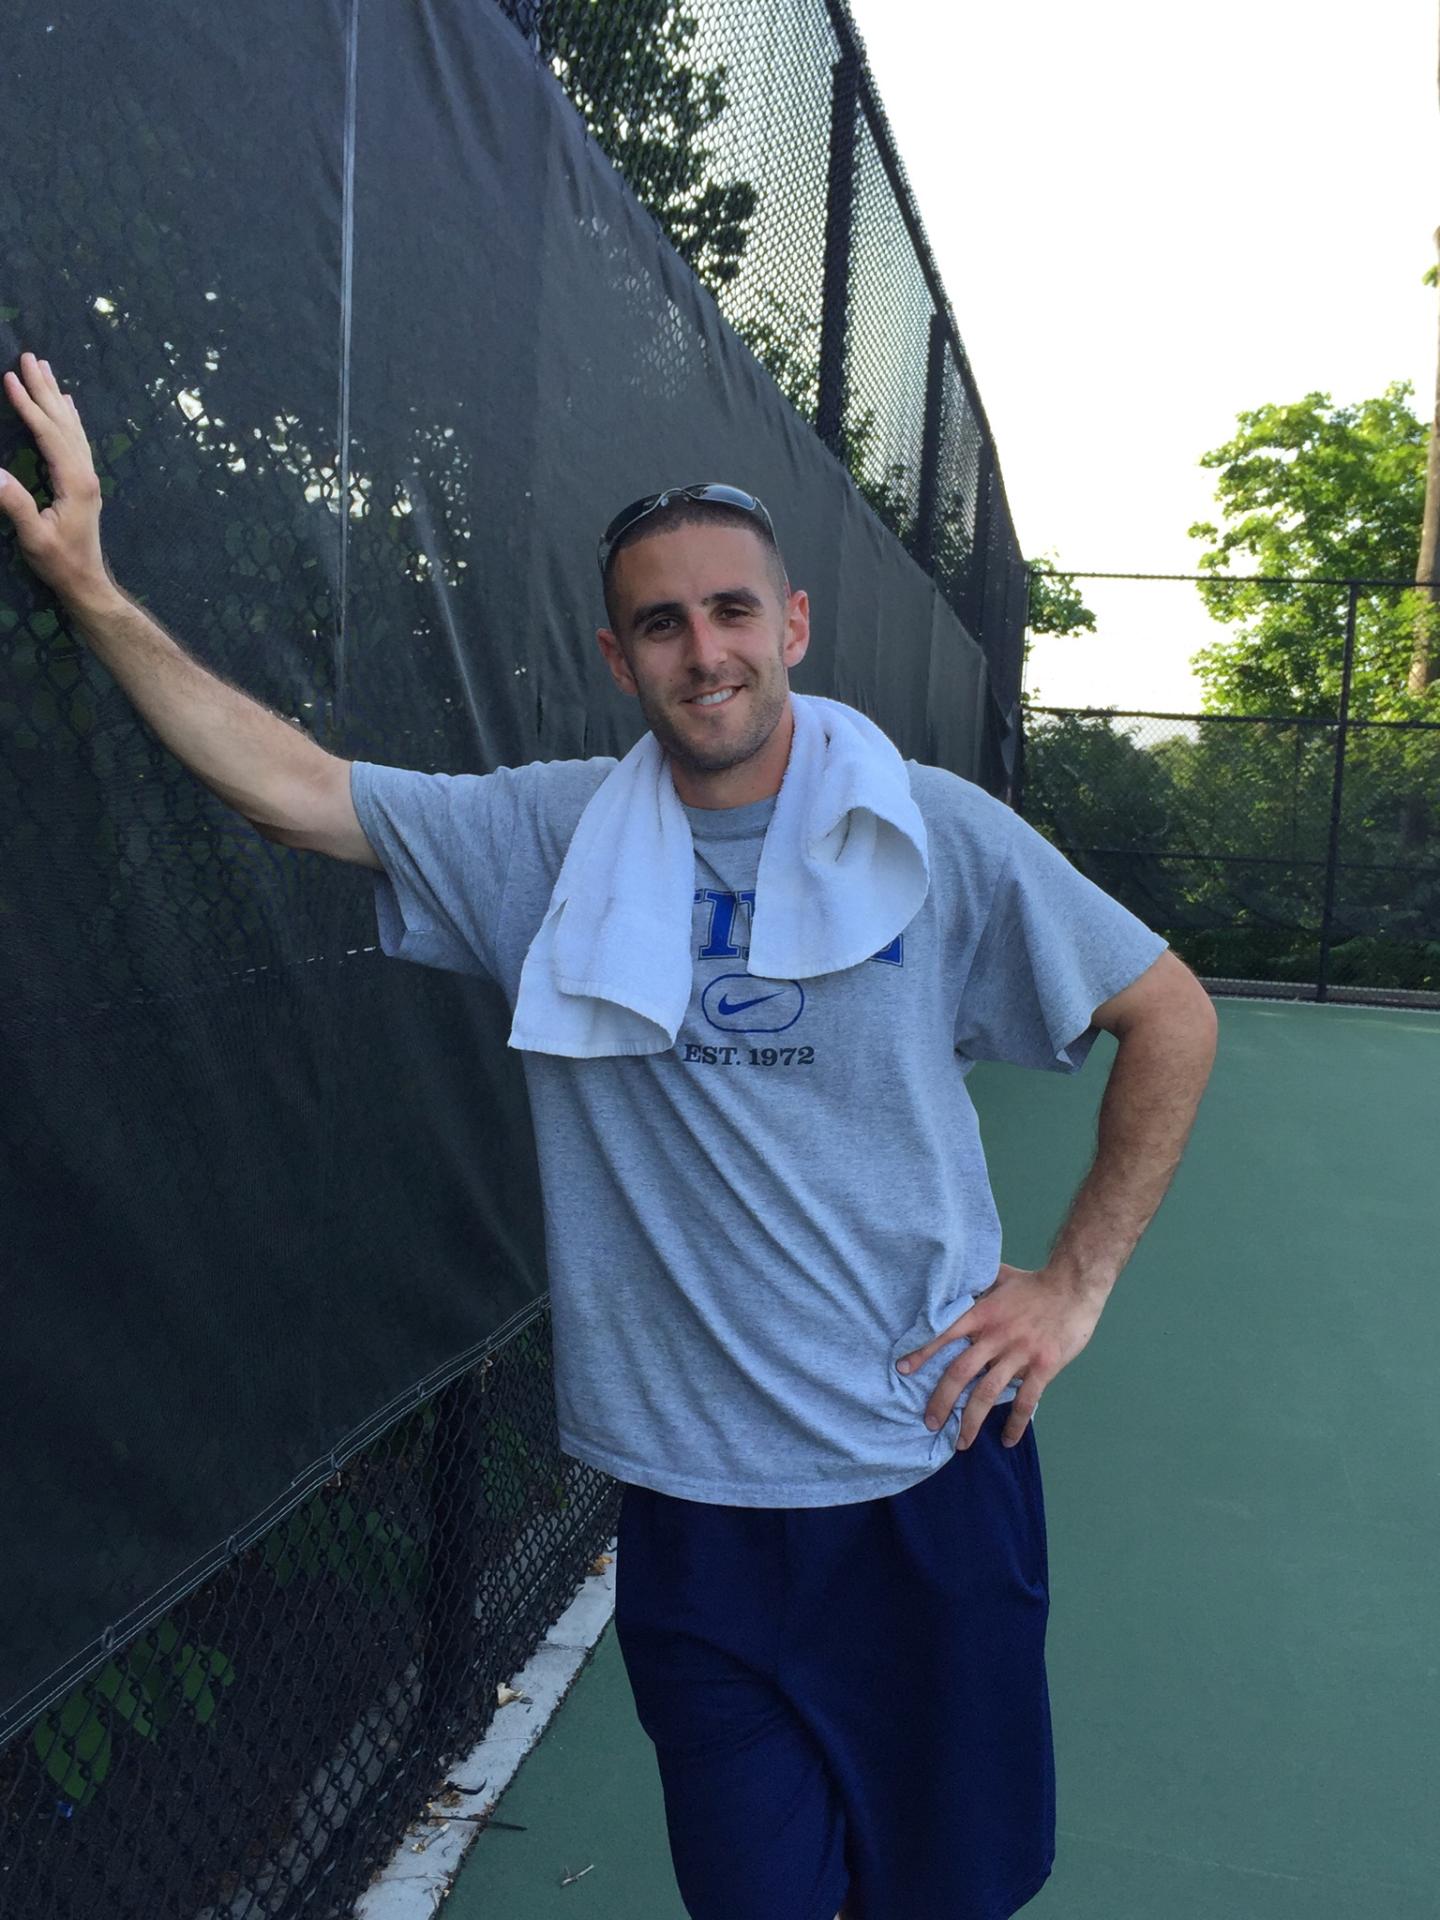 Matthew S. teaches tennis lessons in Glen Cove, NY